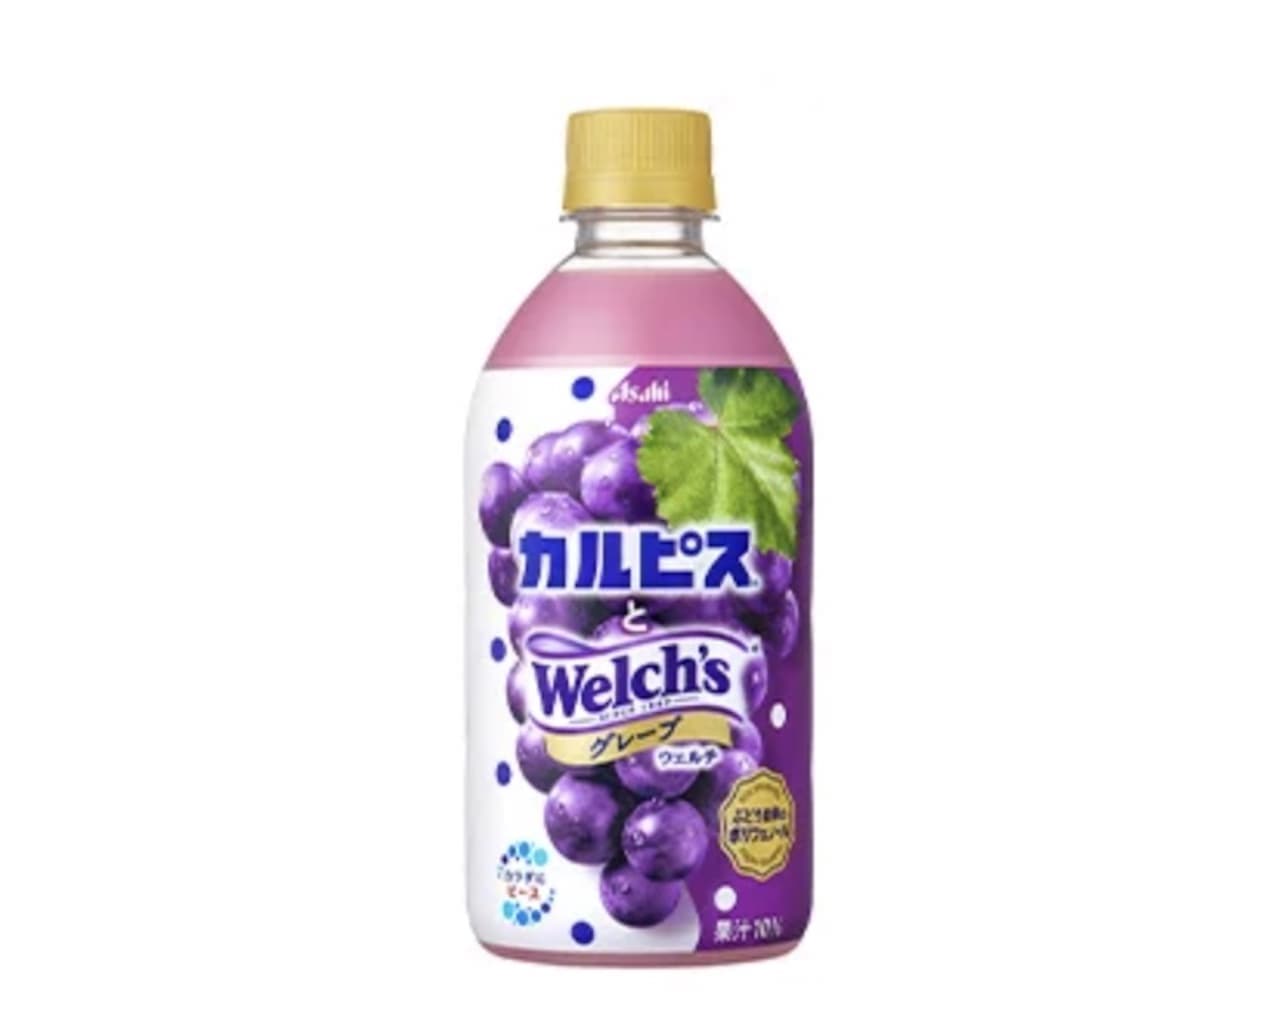 Calpis and Welch's Grape" Calpis and Welch's